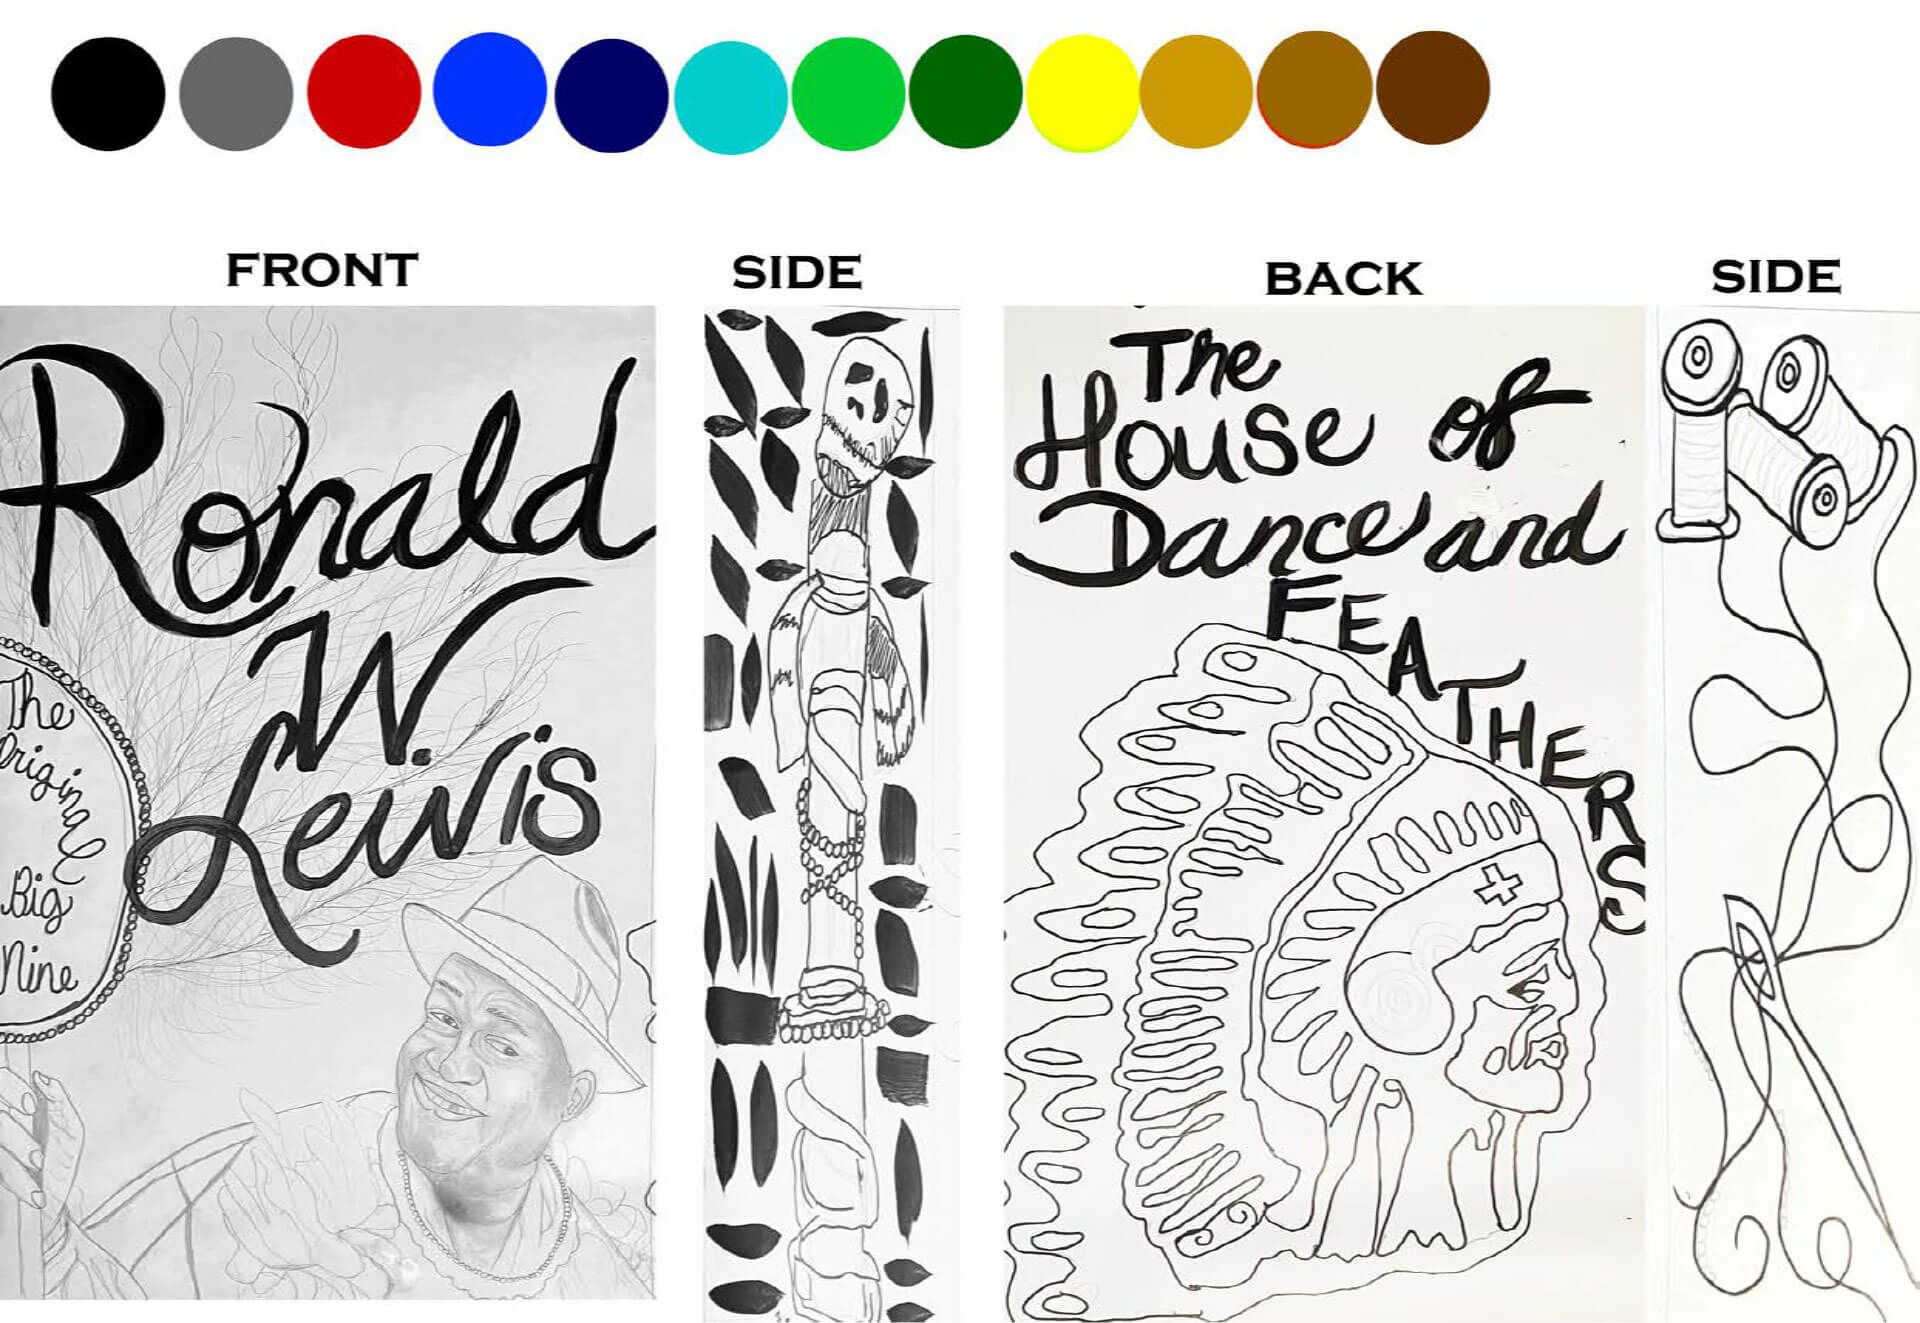 a series of color swatches above illustrations depicting the likeness of Ronald W. Lewis